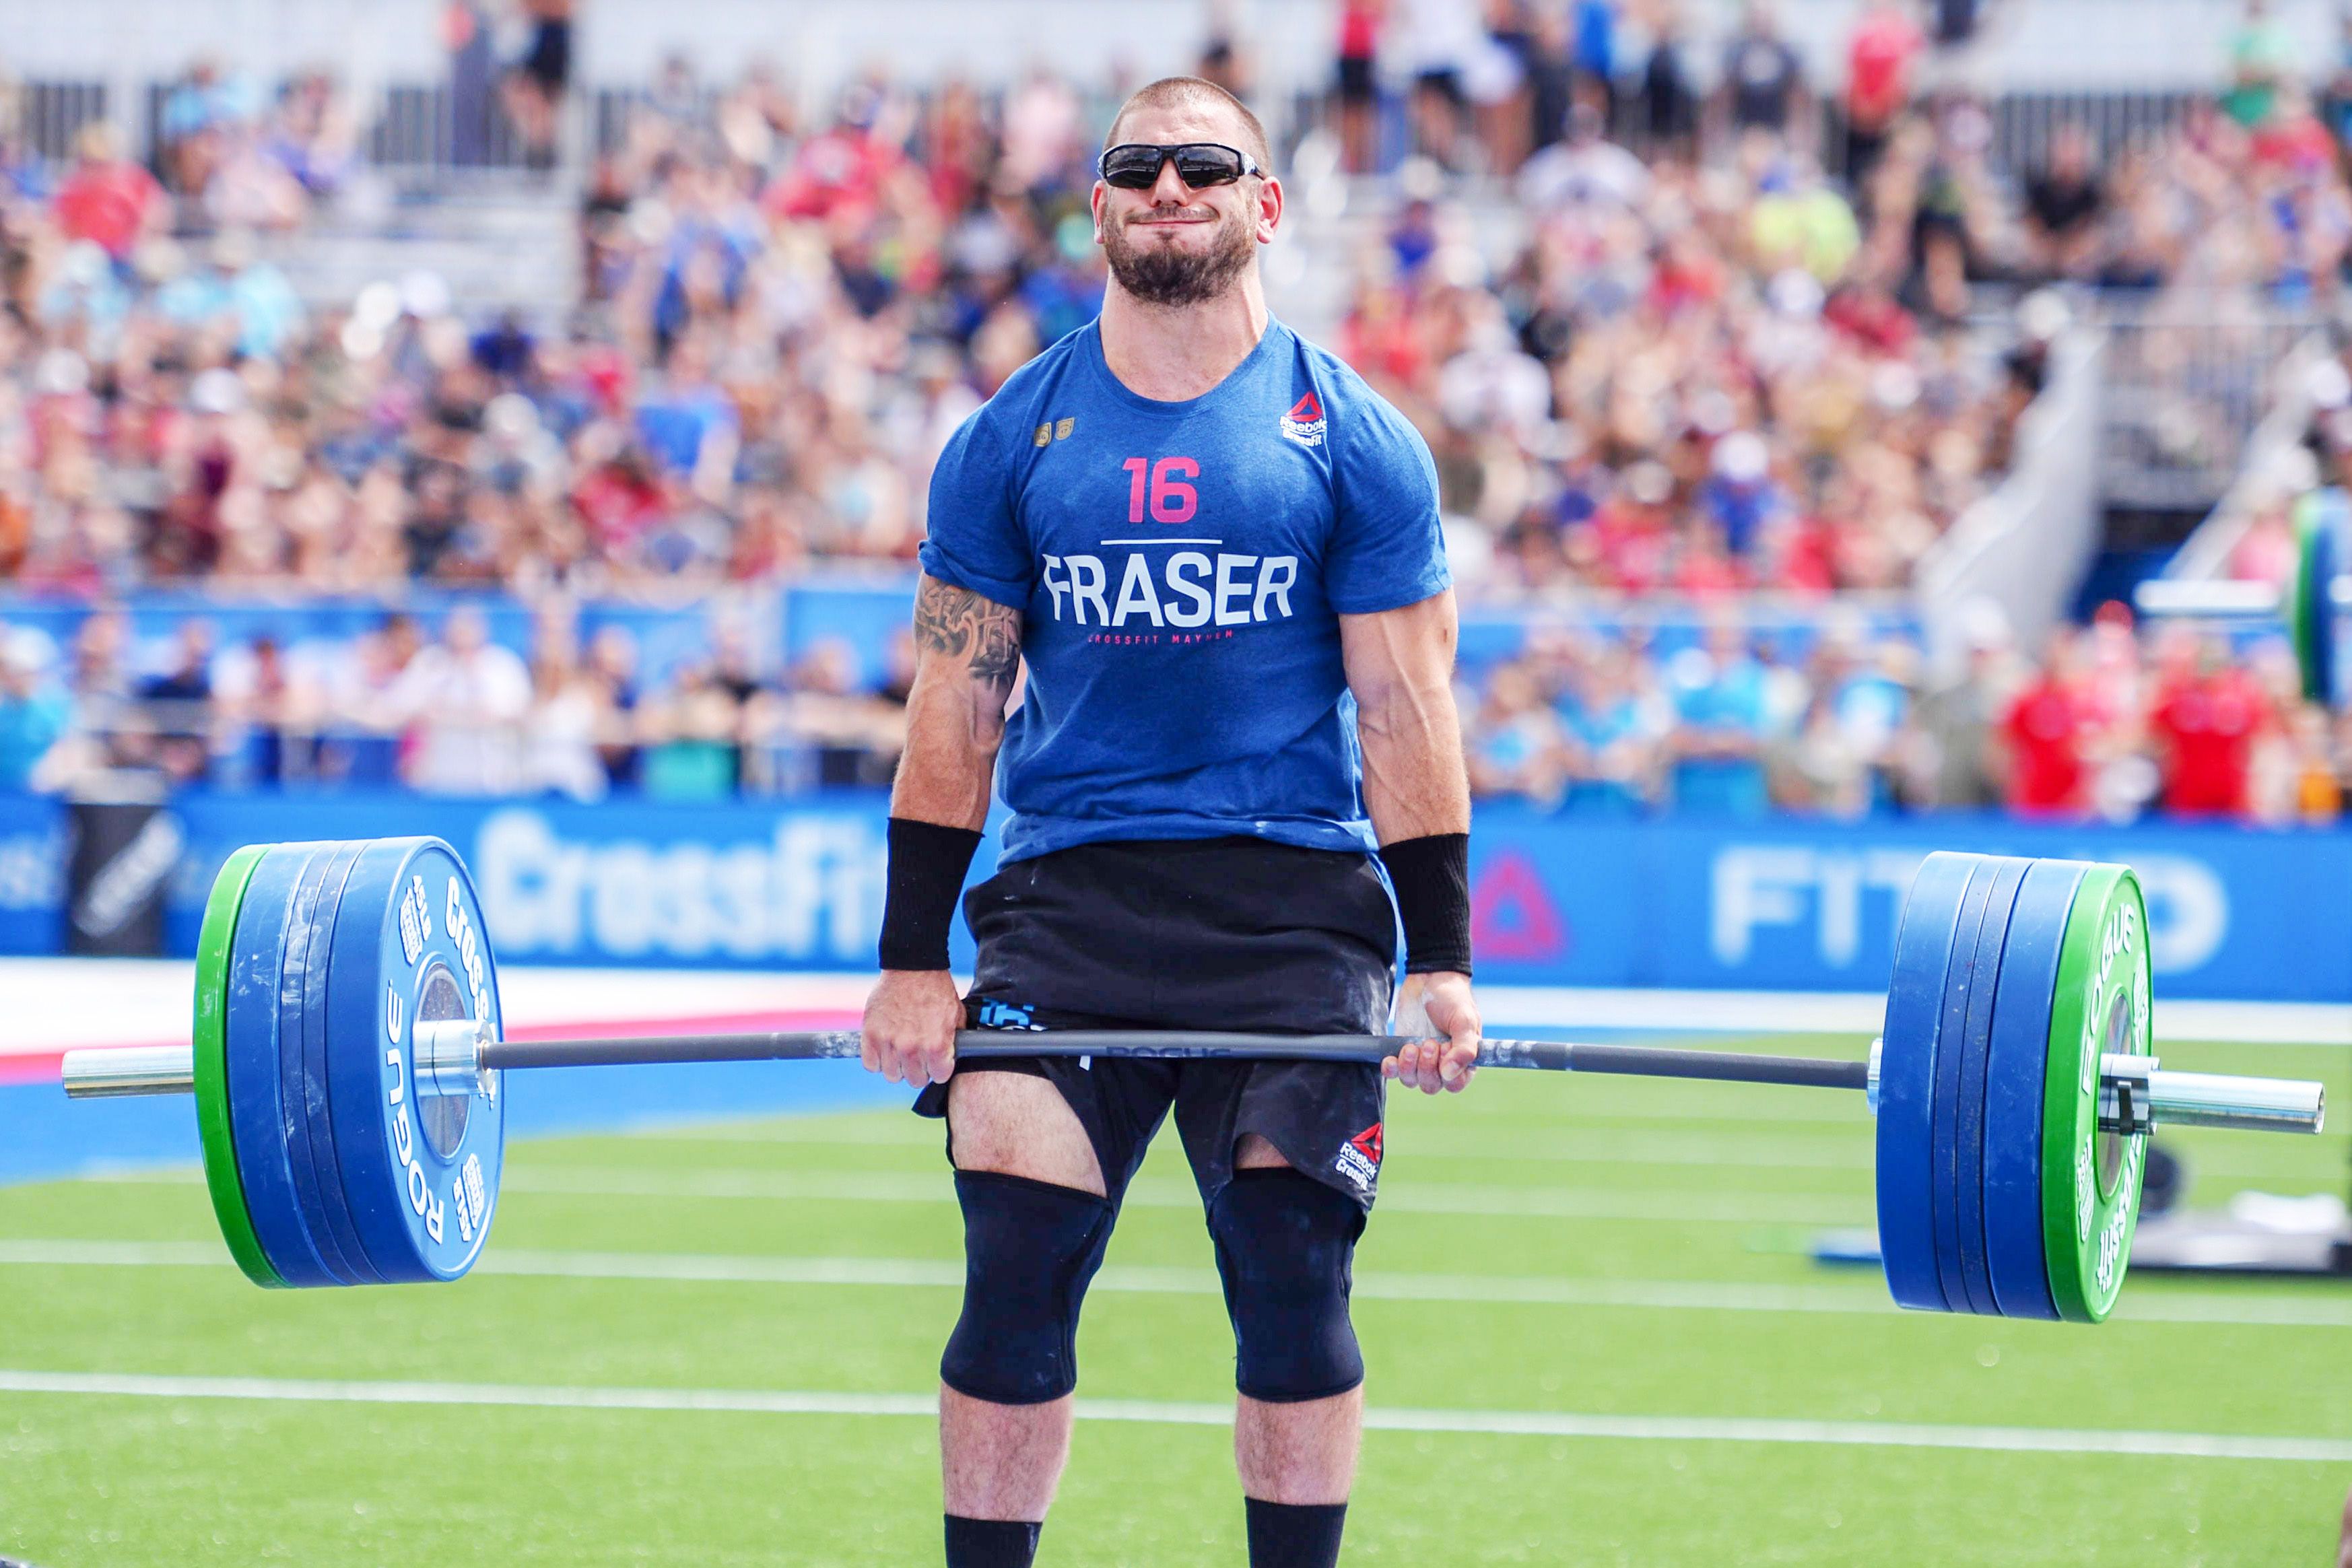 How to Watch the 2019 CrossFit Games Stream